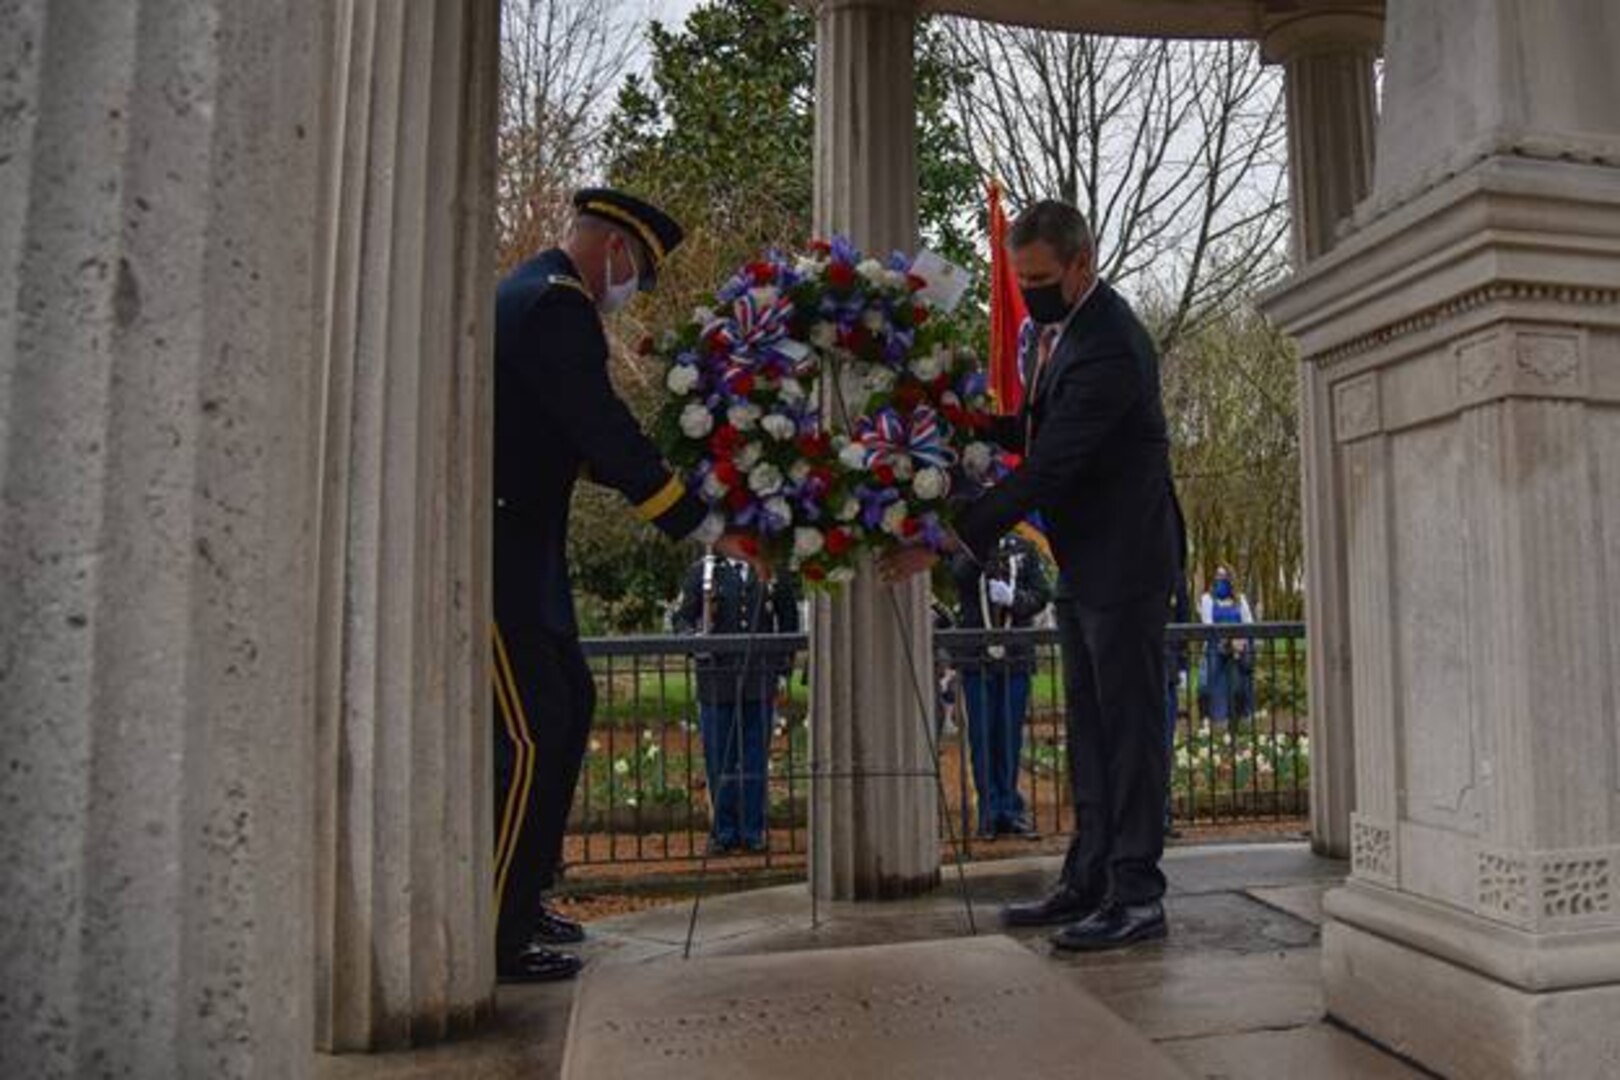 Gov. Bill Lee and Maj. Gen. Jeff Holmes, Tennessee’s adjutant general, place a wreath at the tomb of former President Andrew Jackson, on what would have been his 254th birthday, at The Hermitage in Hermitage, Tenn., March 15, 2021. Every year a wreath is placed at the tomb of the seventh president of the United States, honoring his service to his country and celebrating his life.